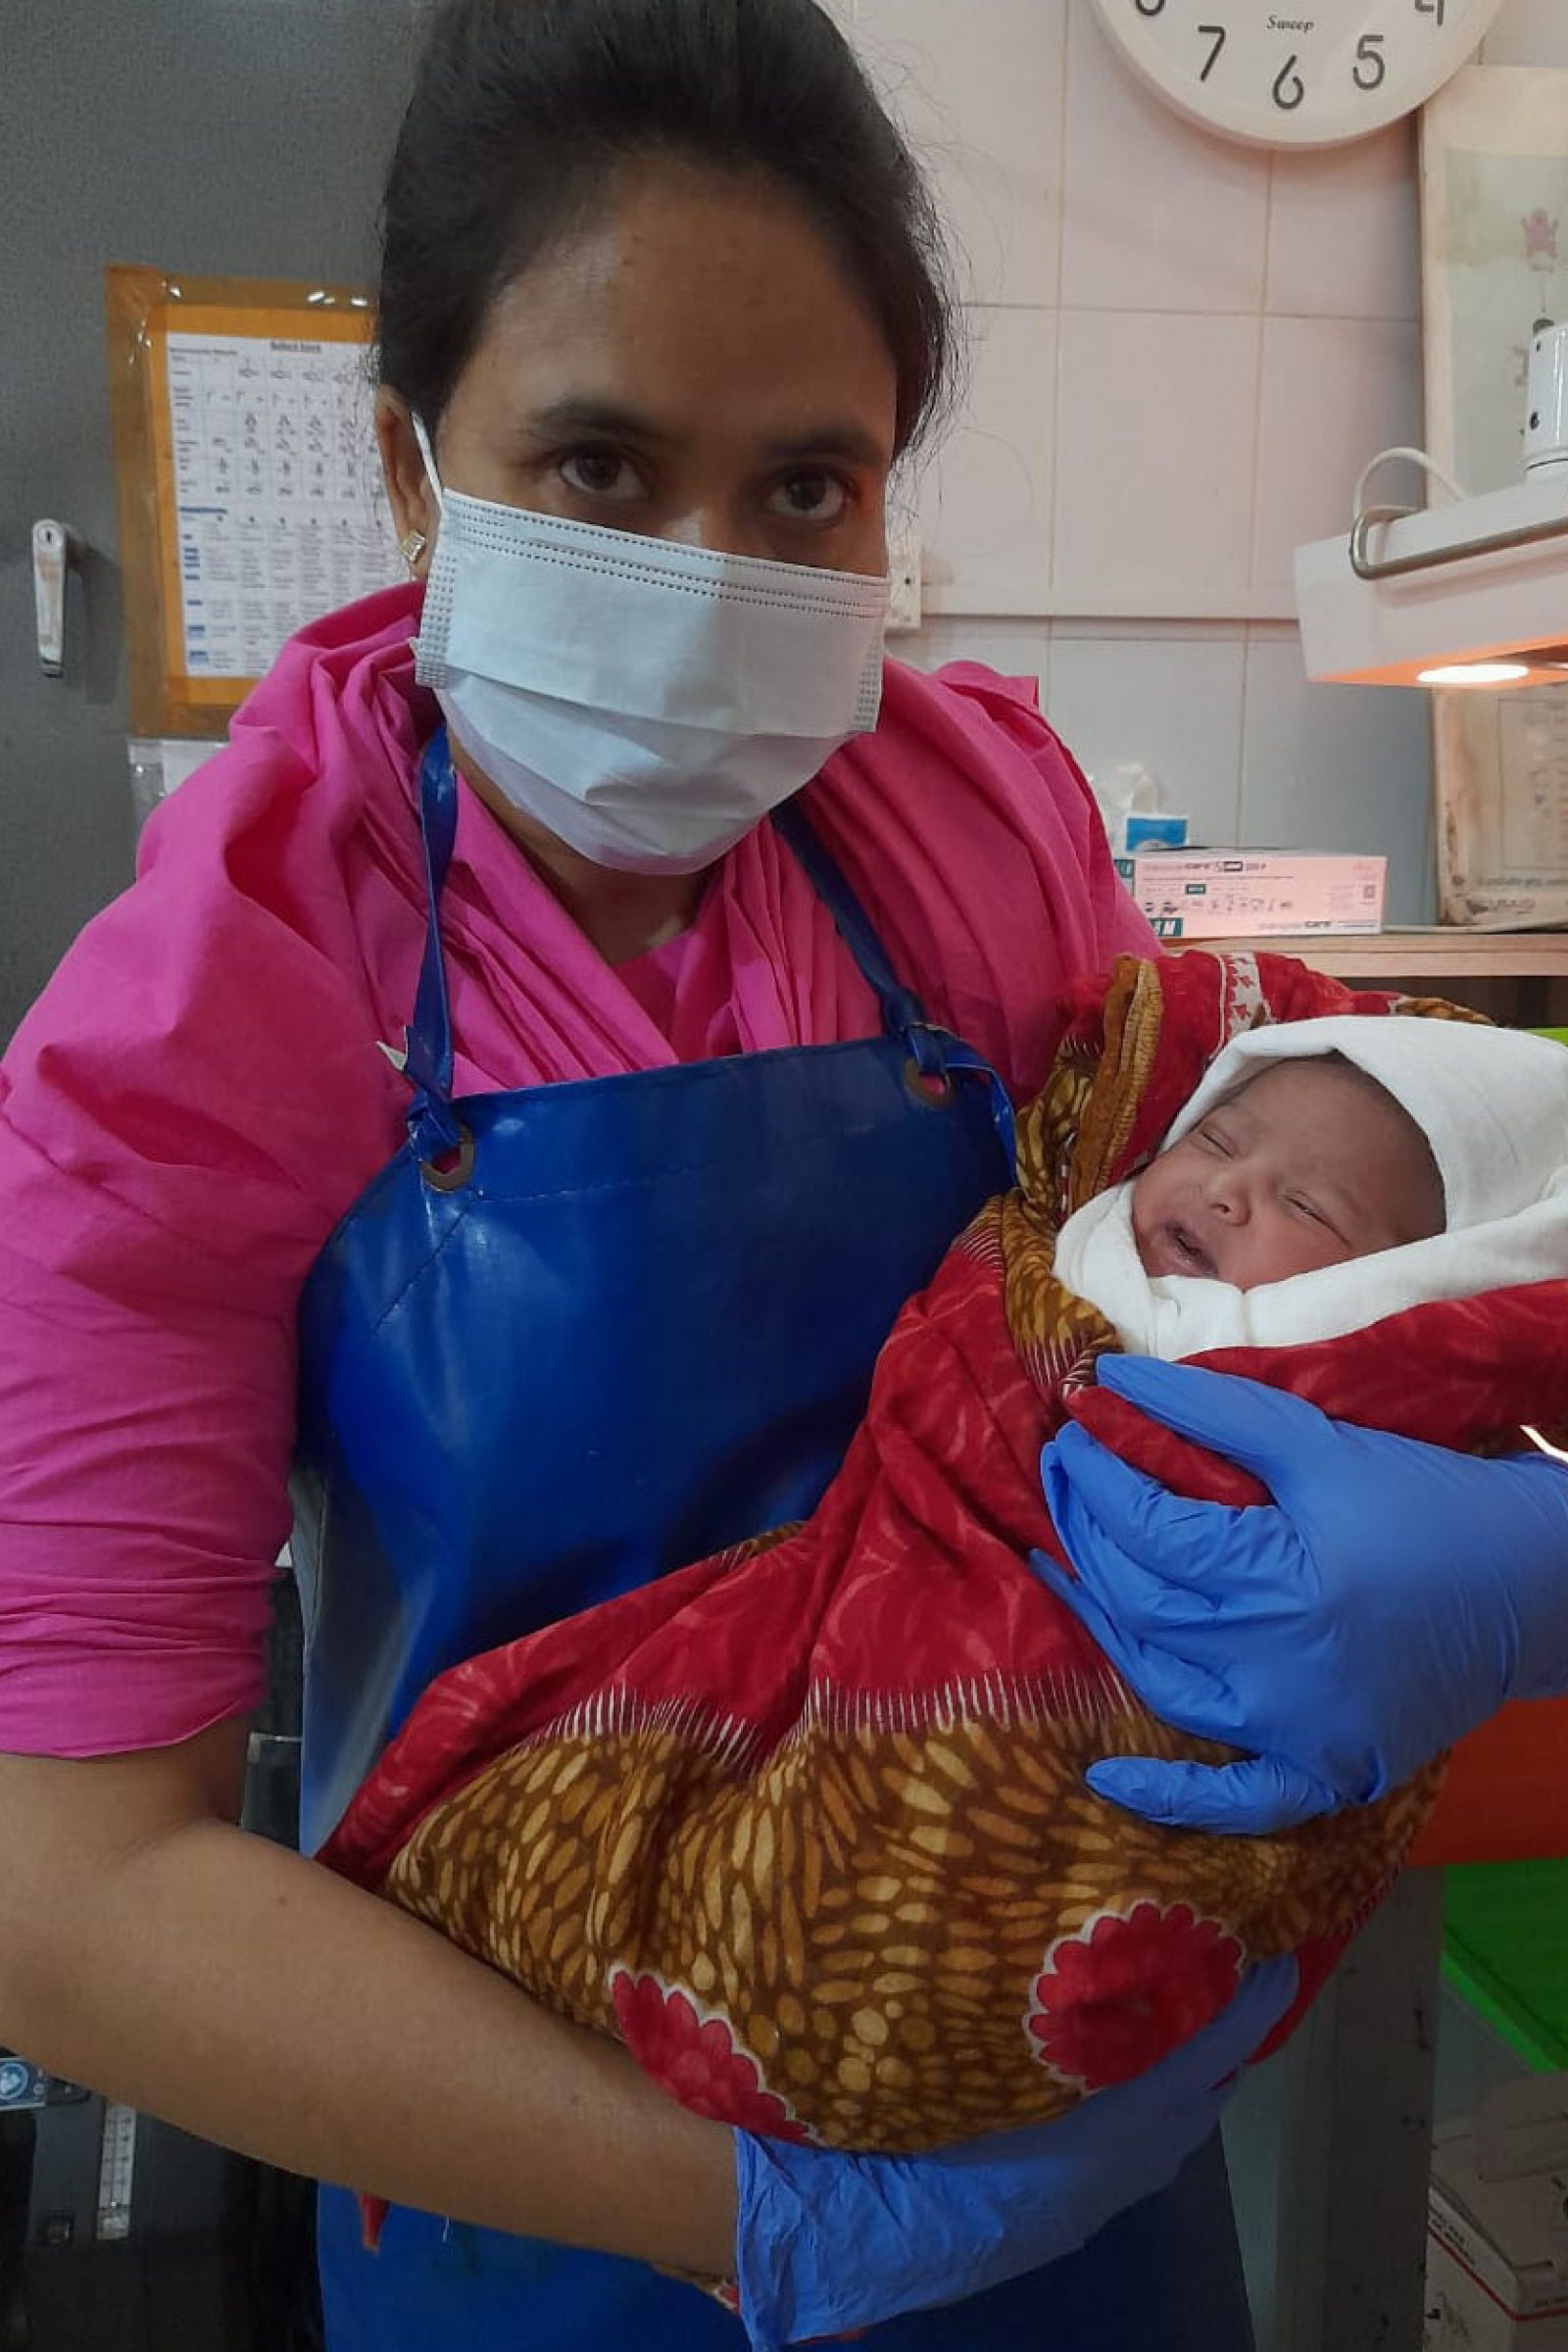 Mohammad, held by one of the midwives who helped deliver him